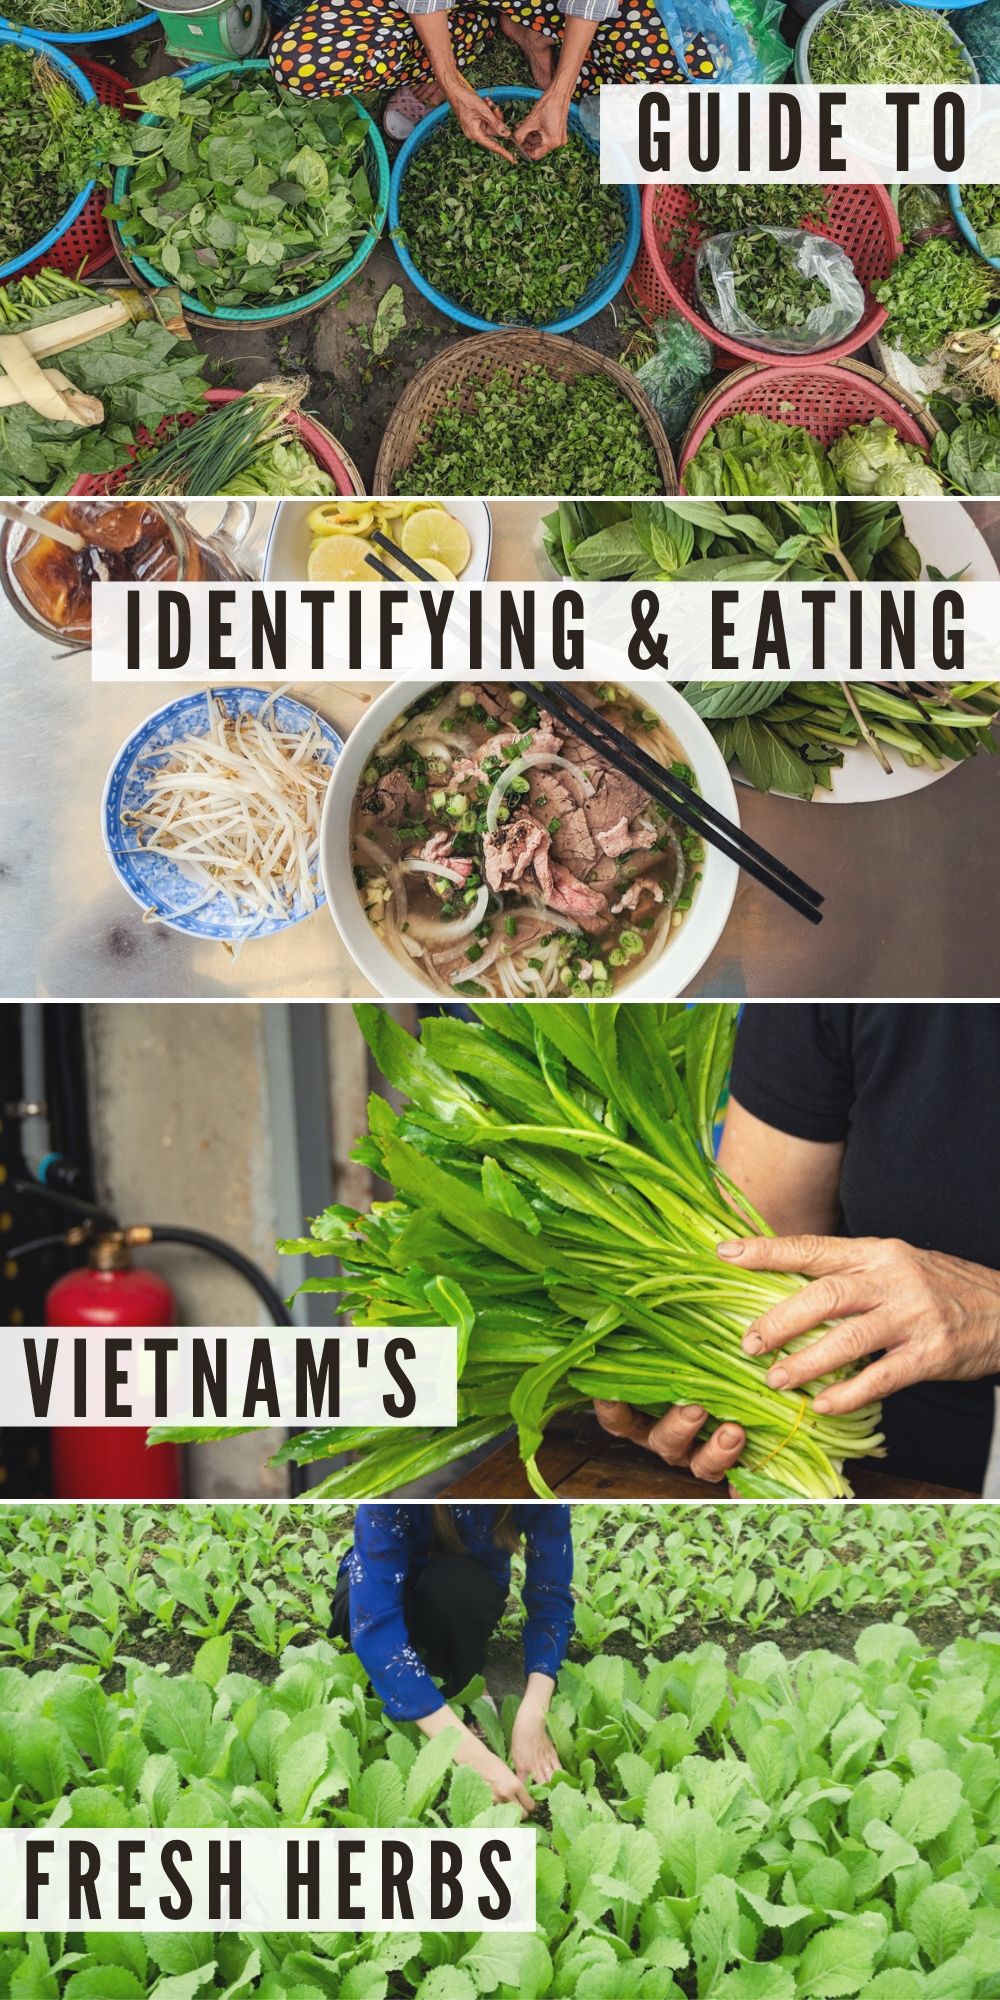 Guide to Vietnamese Herbs: Identifying & Eating